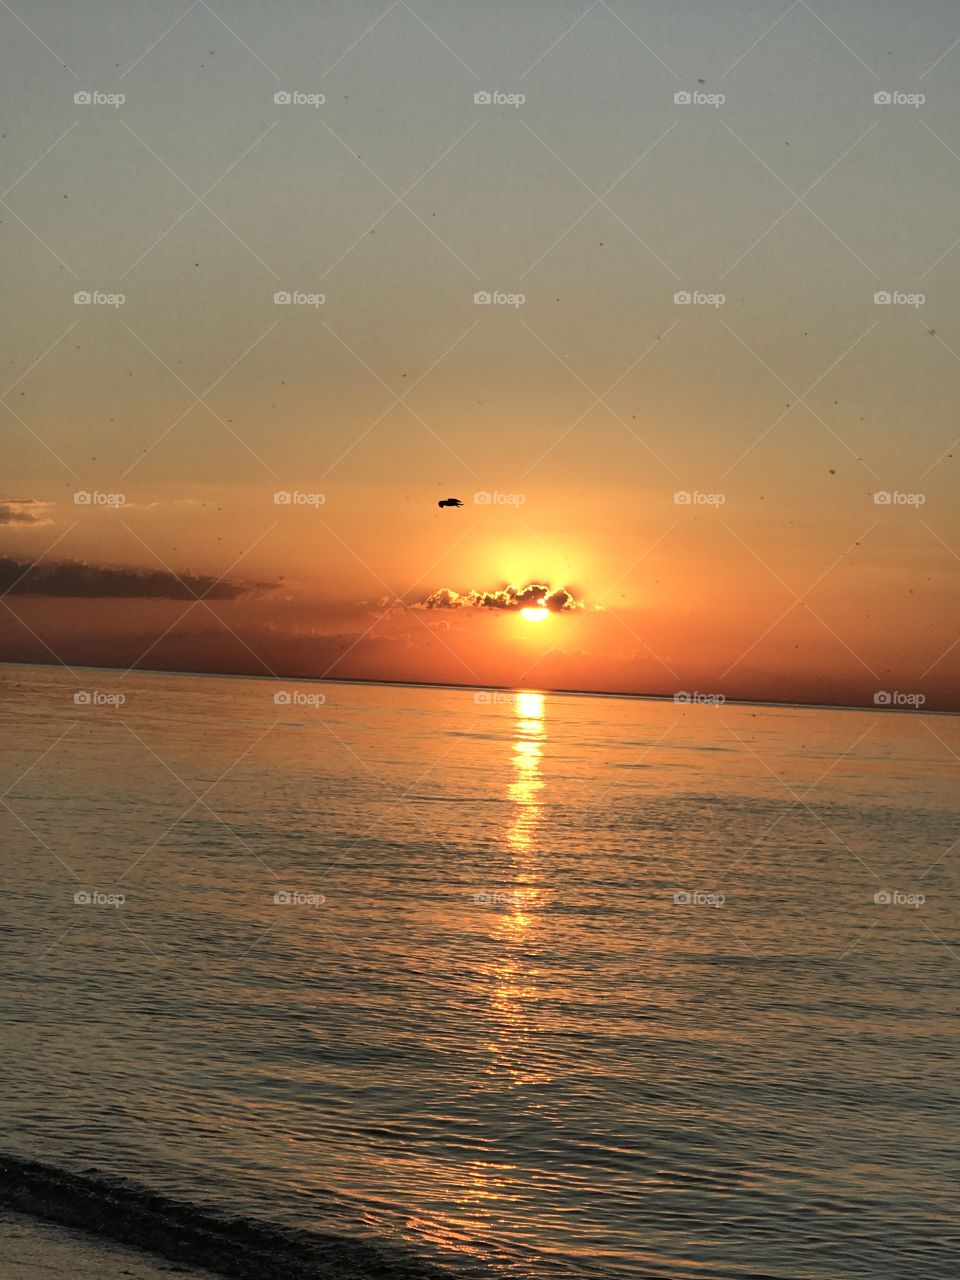 Sunset over water with bird flying by